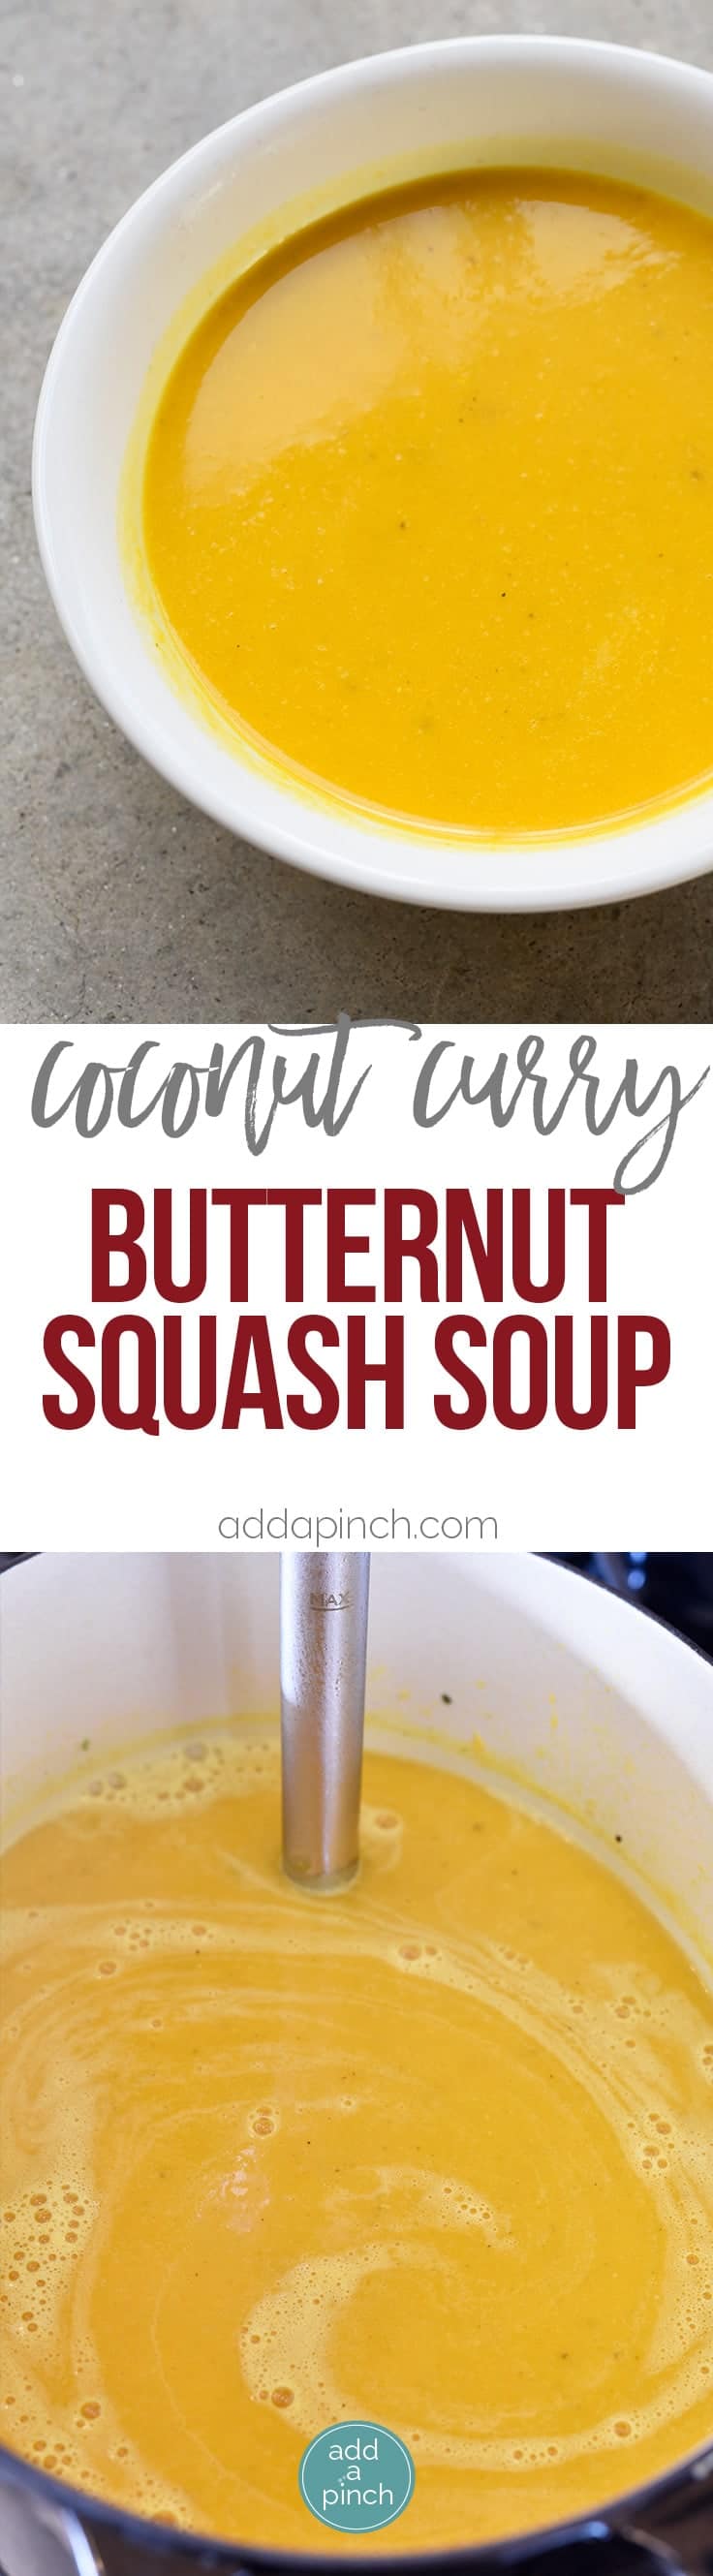 Coconut Curry Butternut Squash Soup Recipe - Coconut Curry Butternut Squash Soup makes a creamy, delicious soup recipe. Dairy-free, gluten-free, but certainly not flavor-free! // addapinch.com